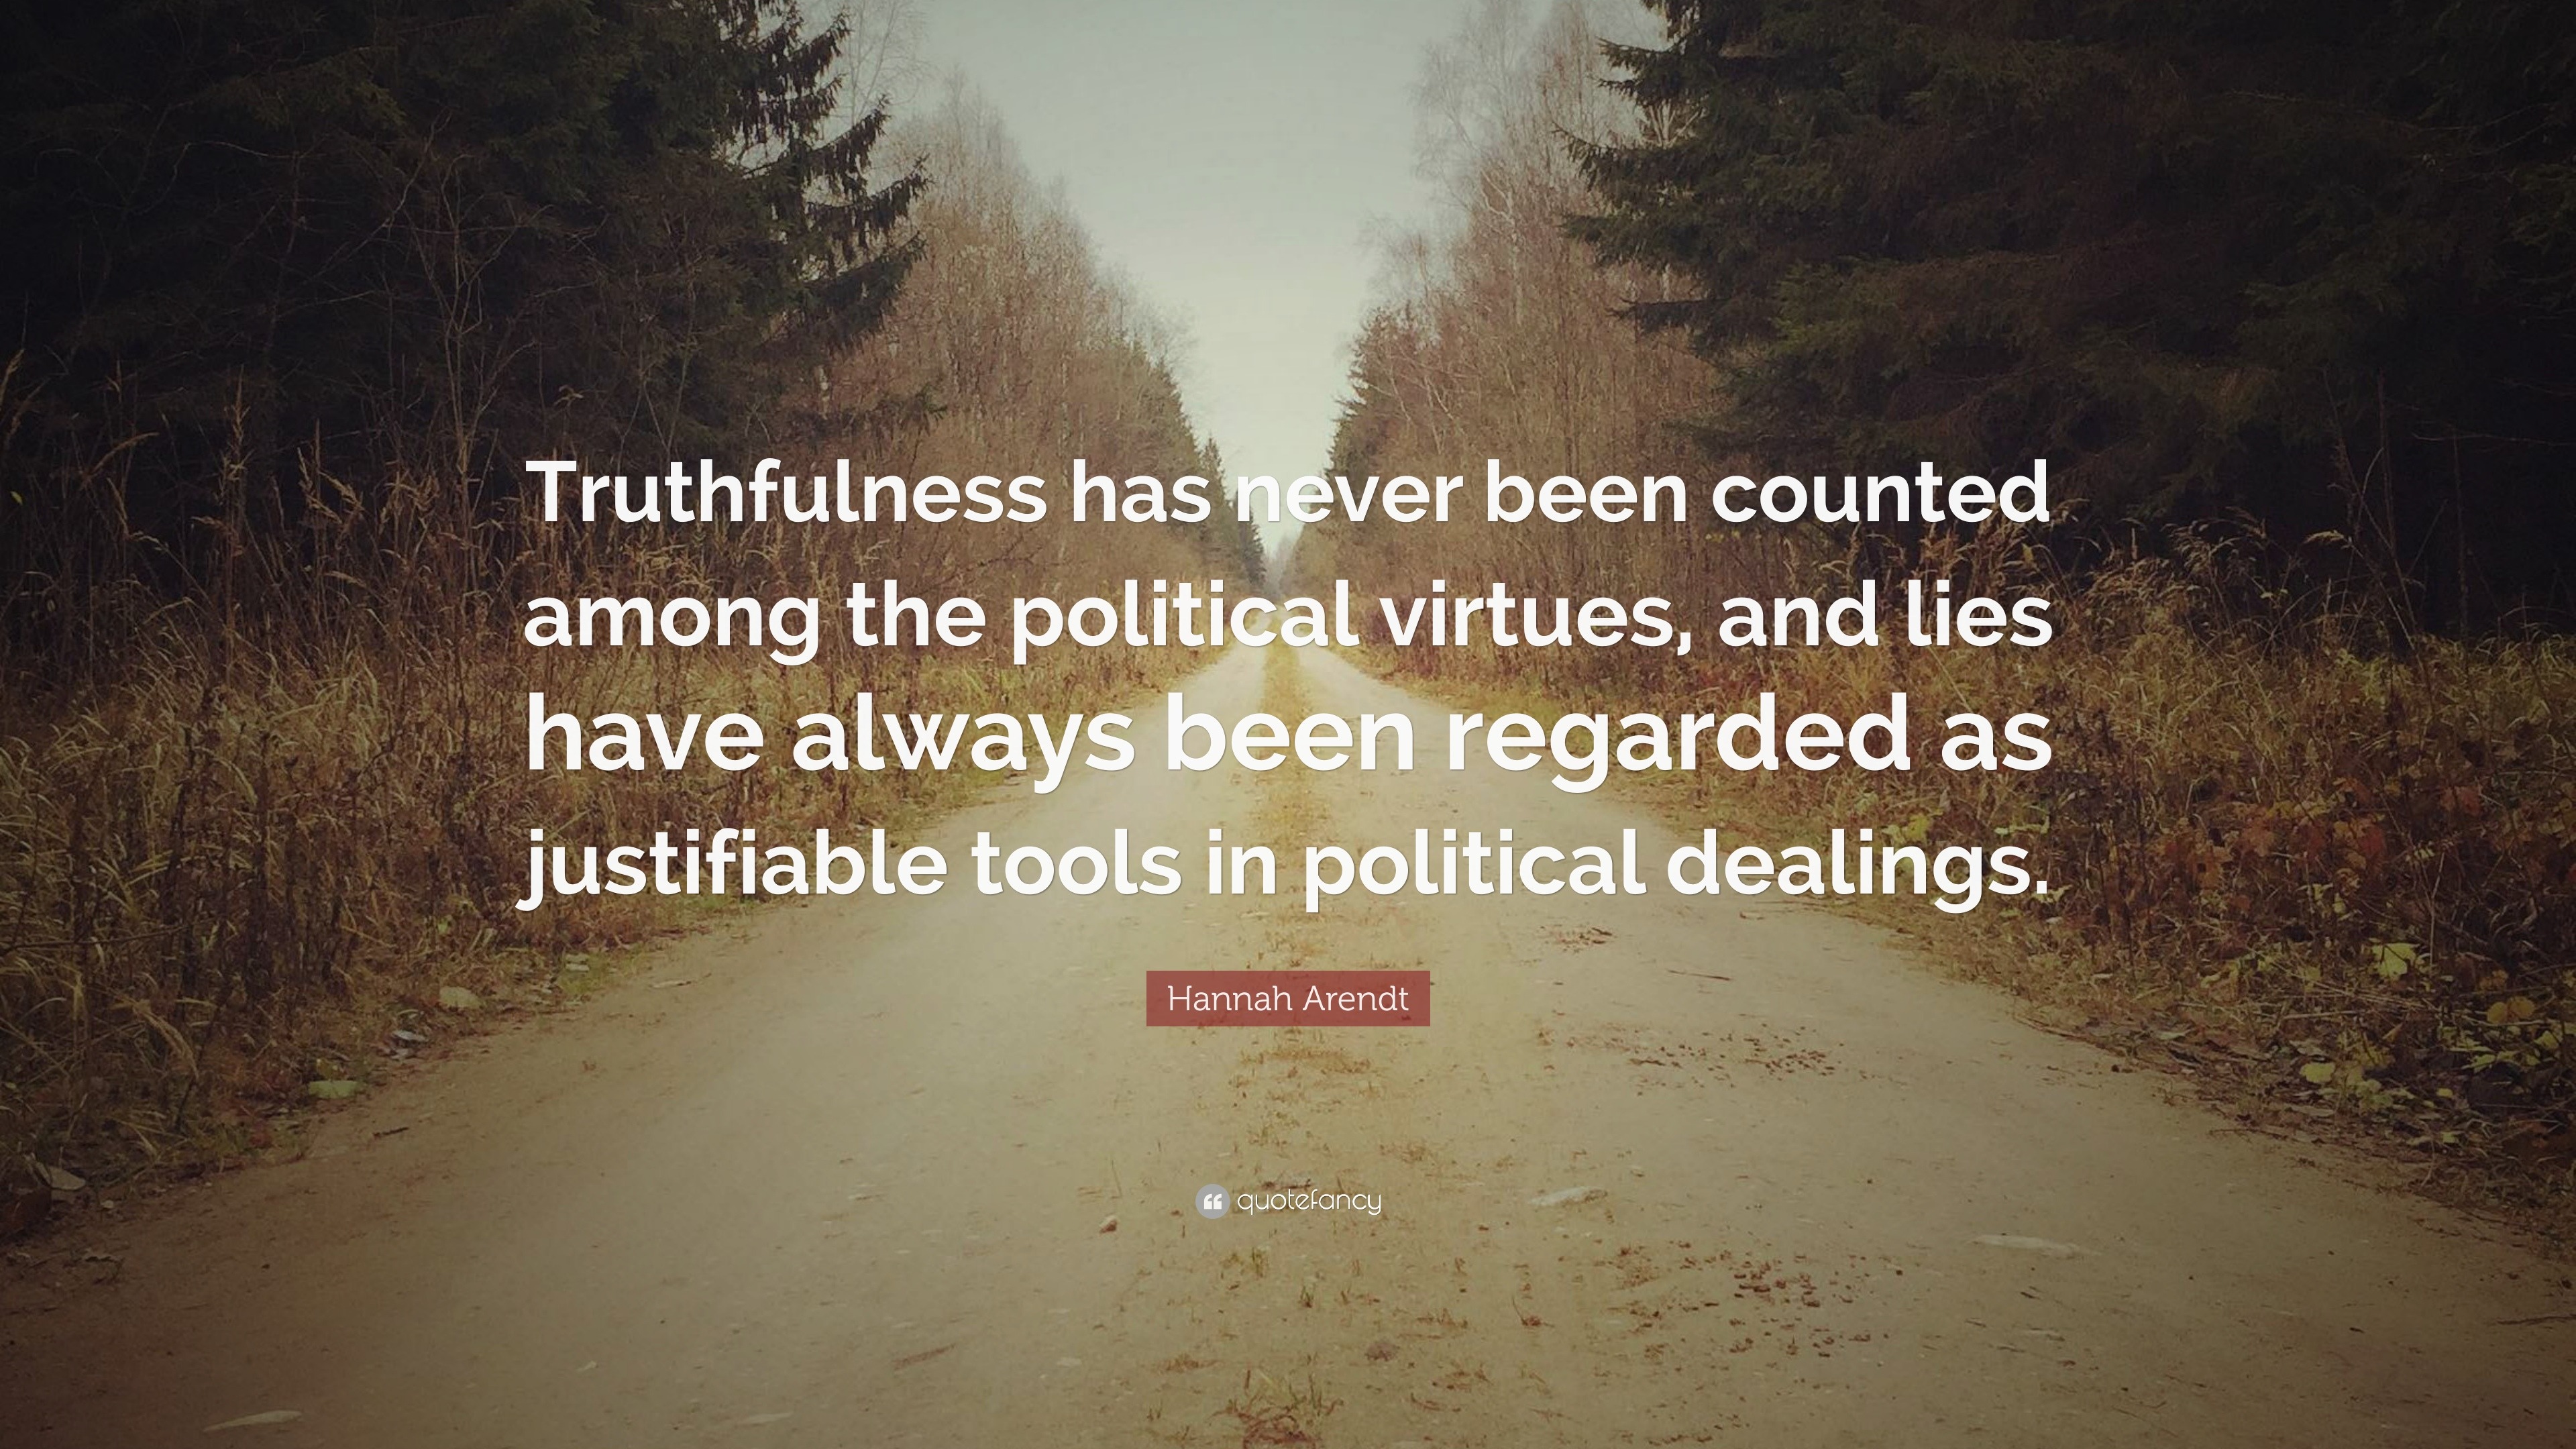 Hannah Arendt Quote: “Truthfulness has never been counted among the ...